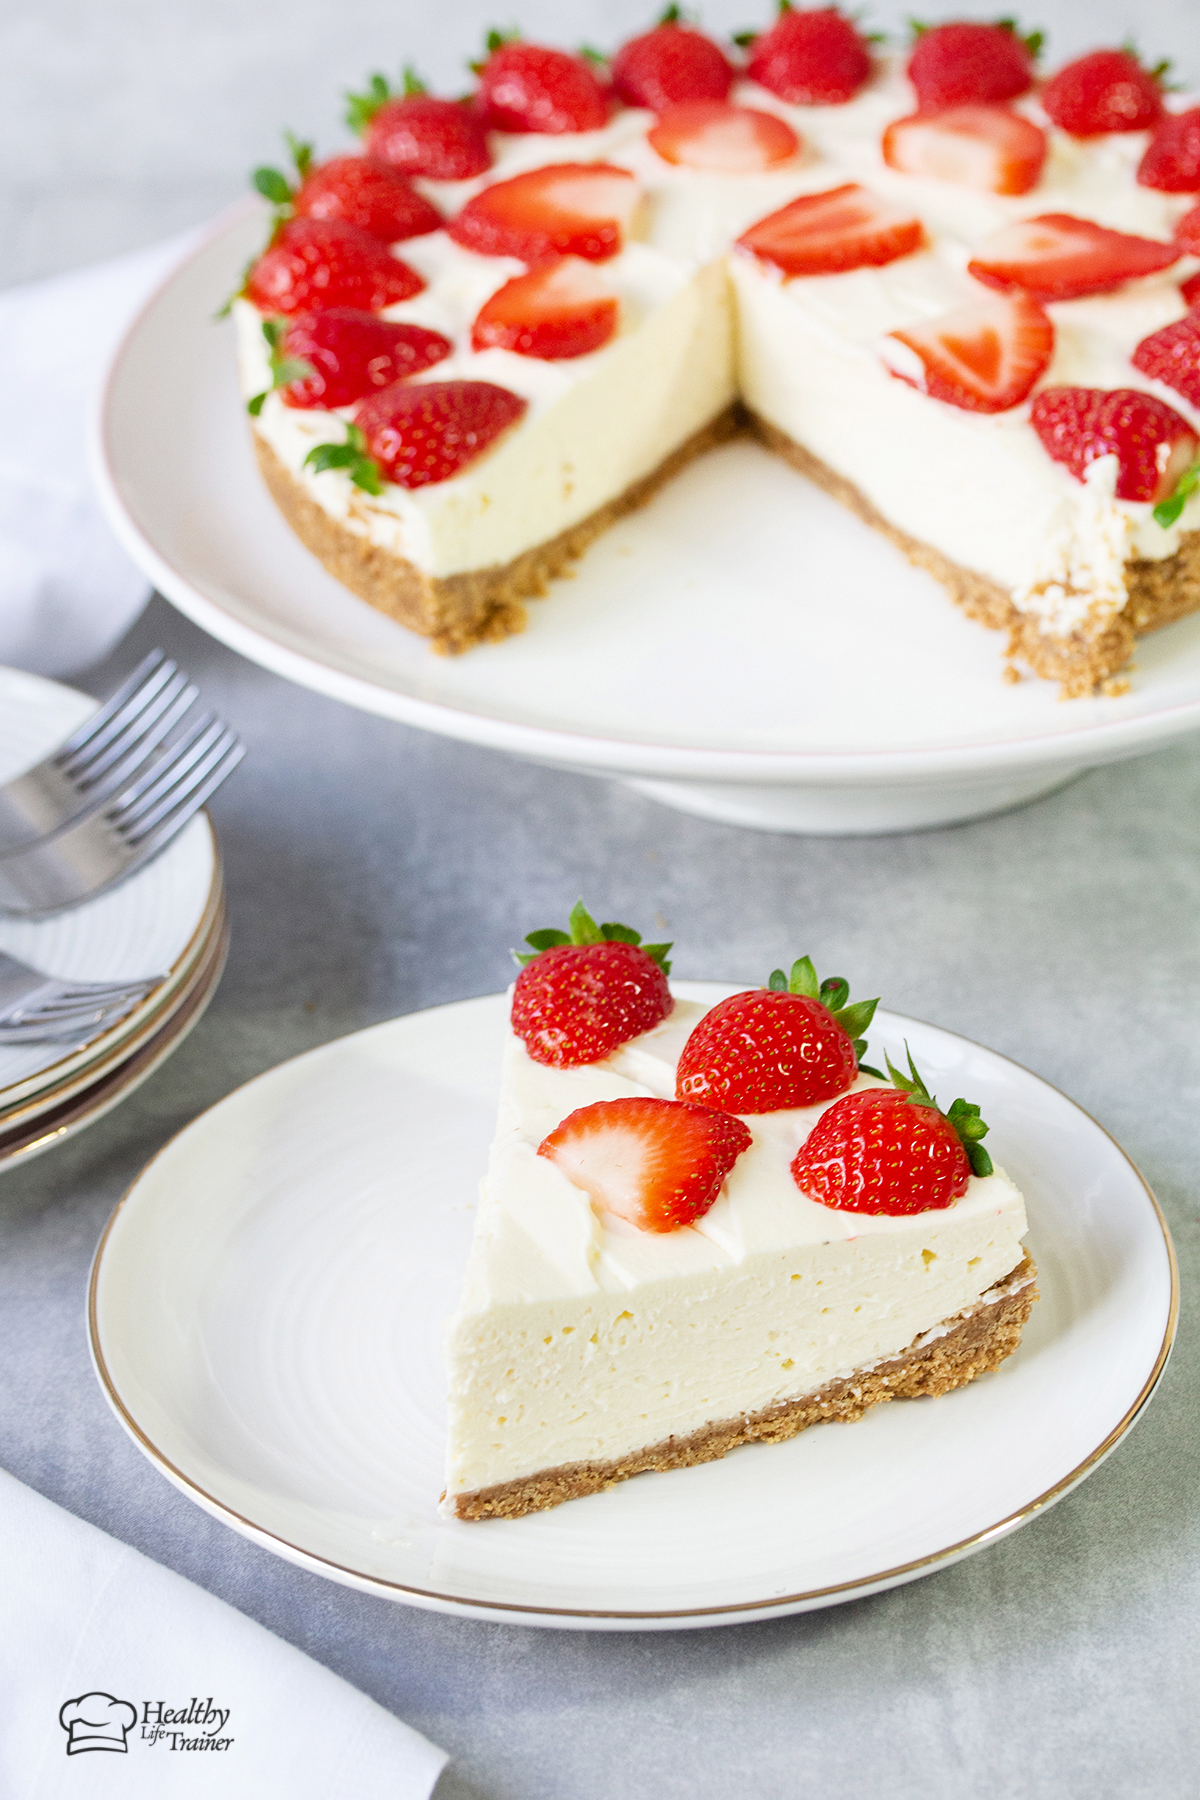 A slice of the philadelphia no-bake cheesecake in a serving plate.